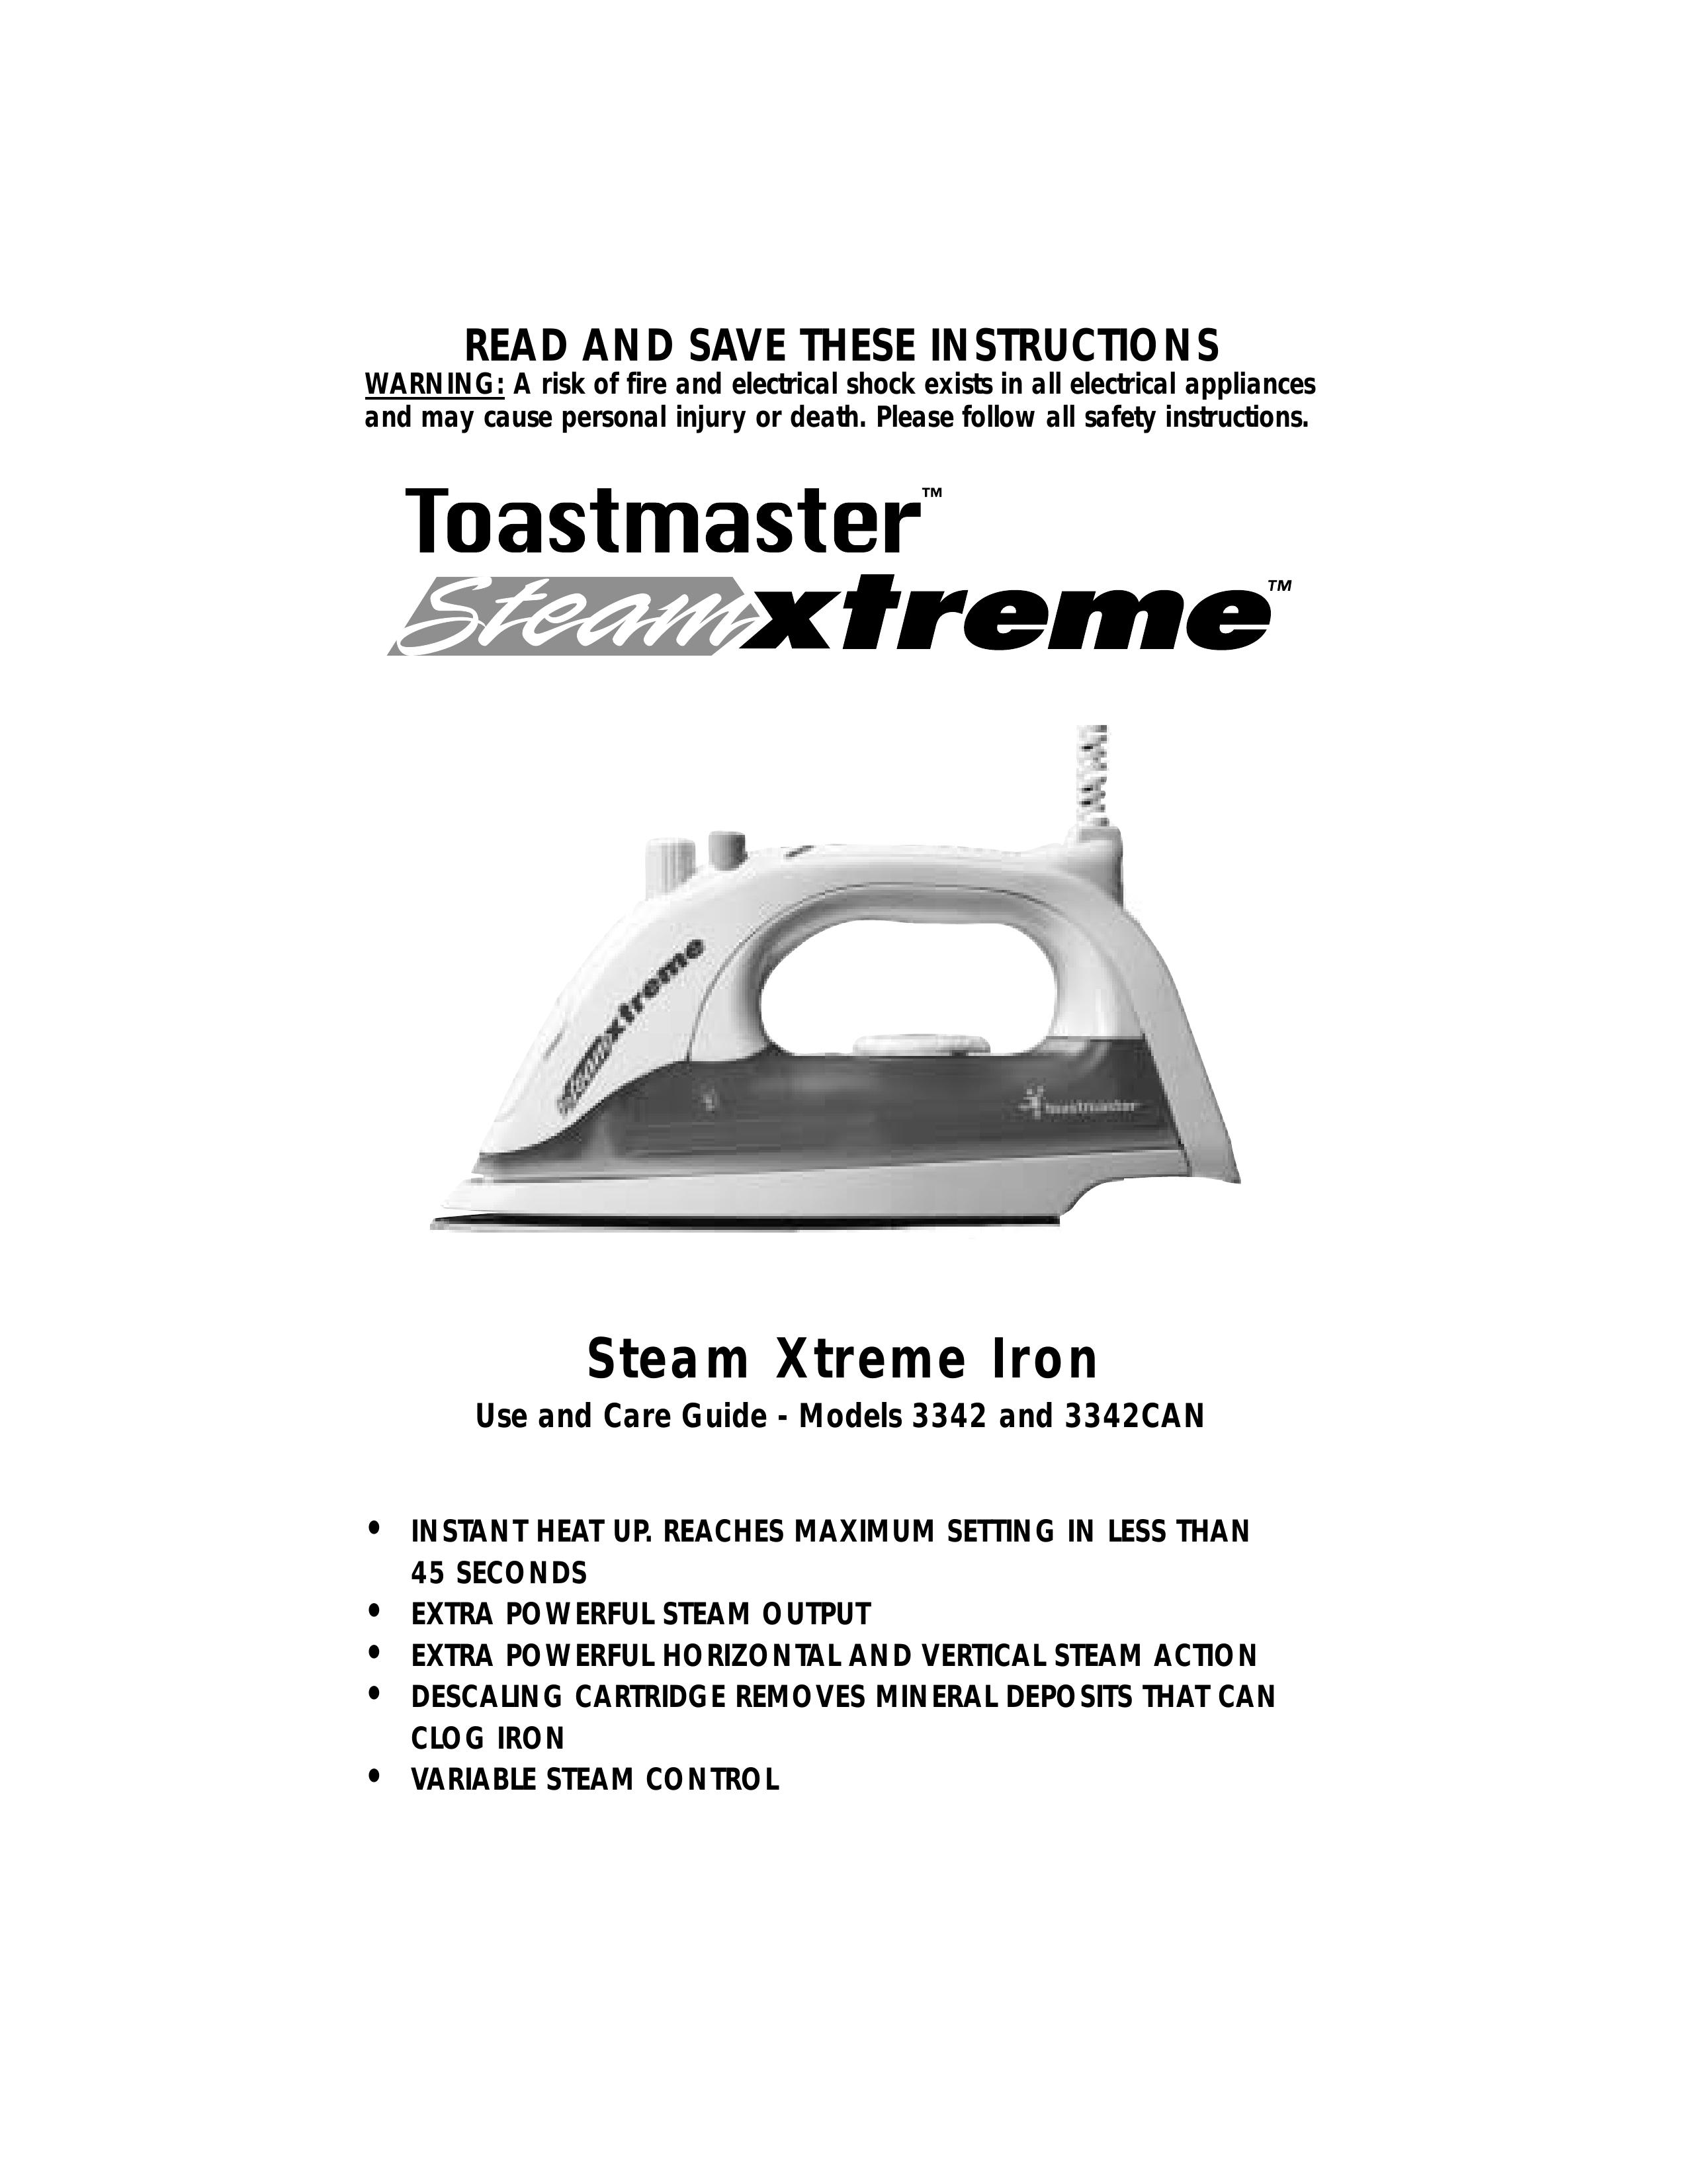 Toastmaster 3342CAN Iron User Manual